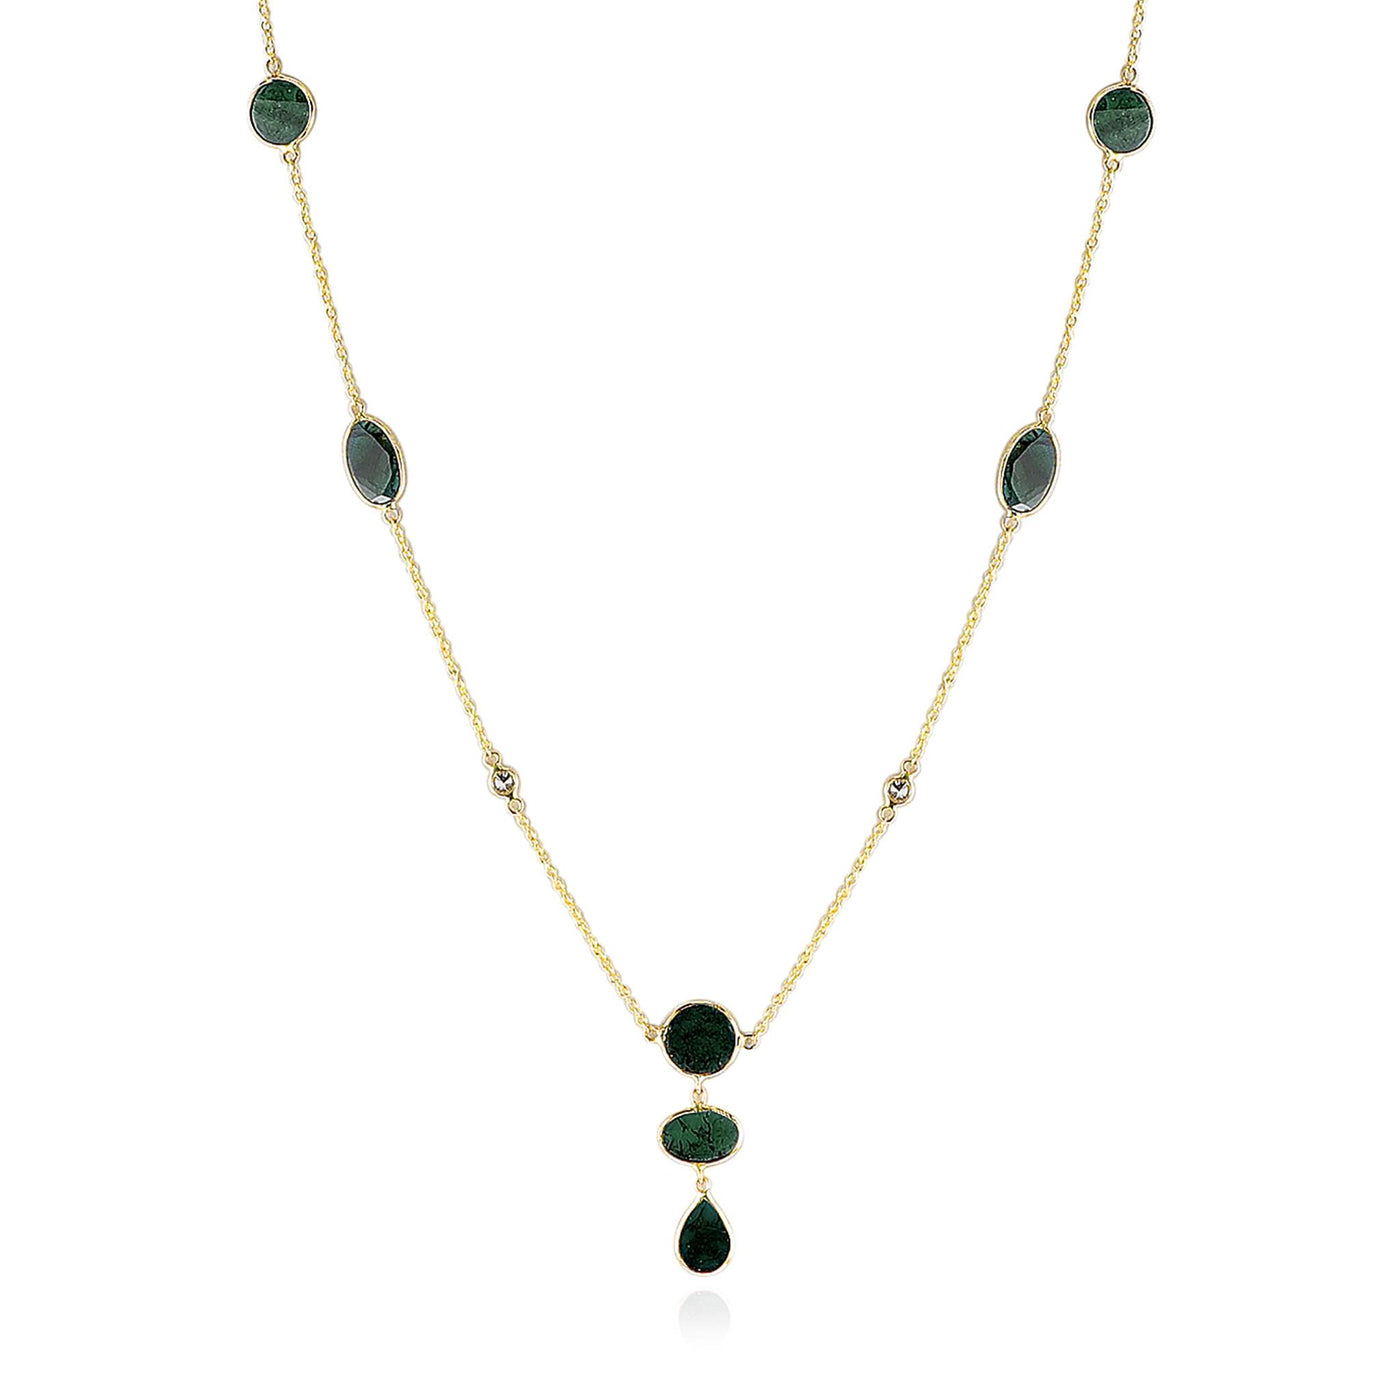 14K Yellow Gold 2.73ctw Lariat Style Necklace